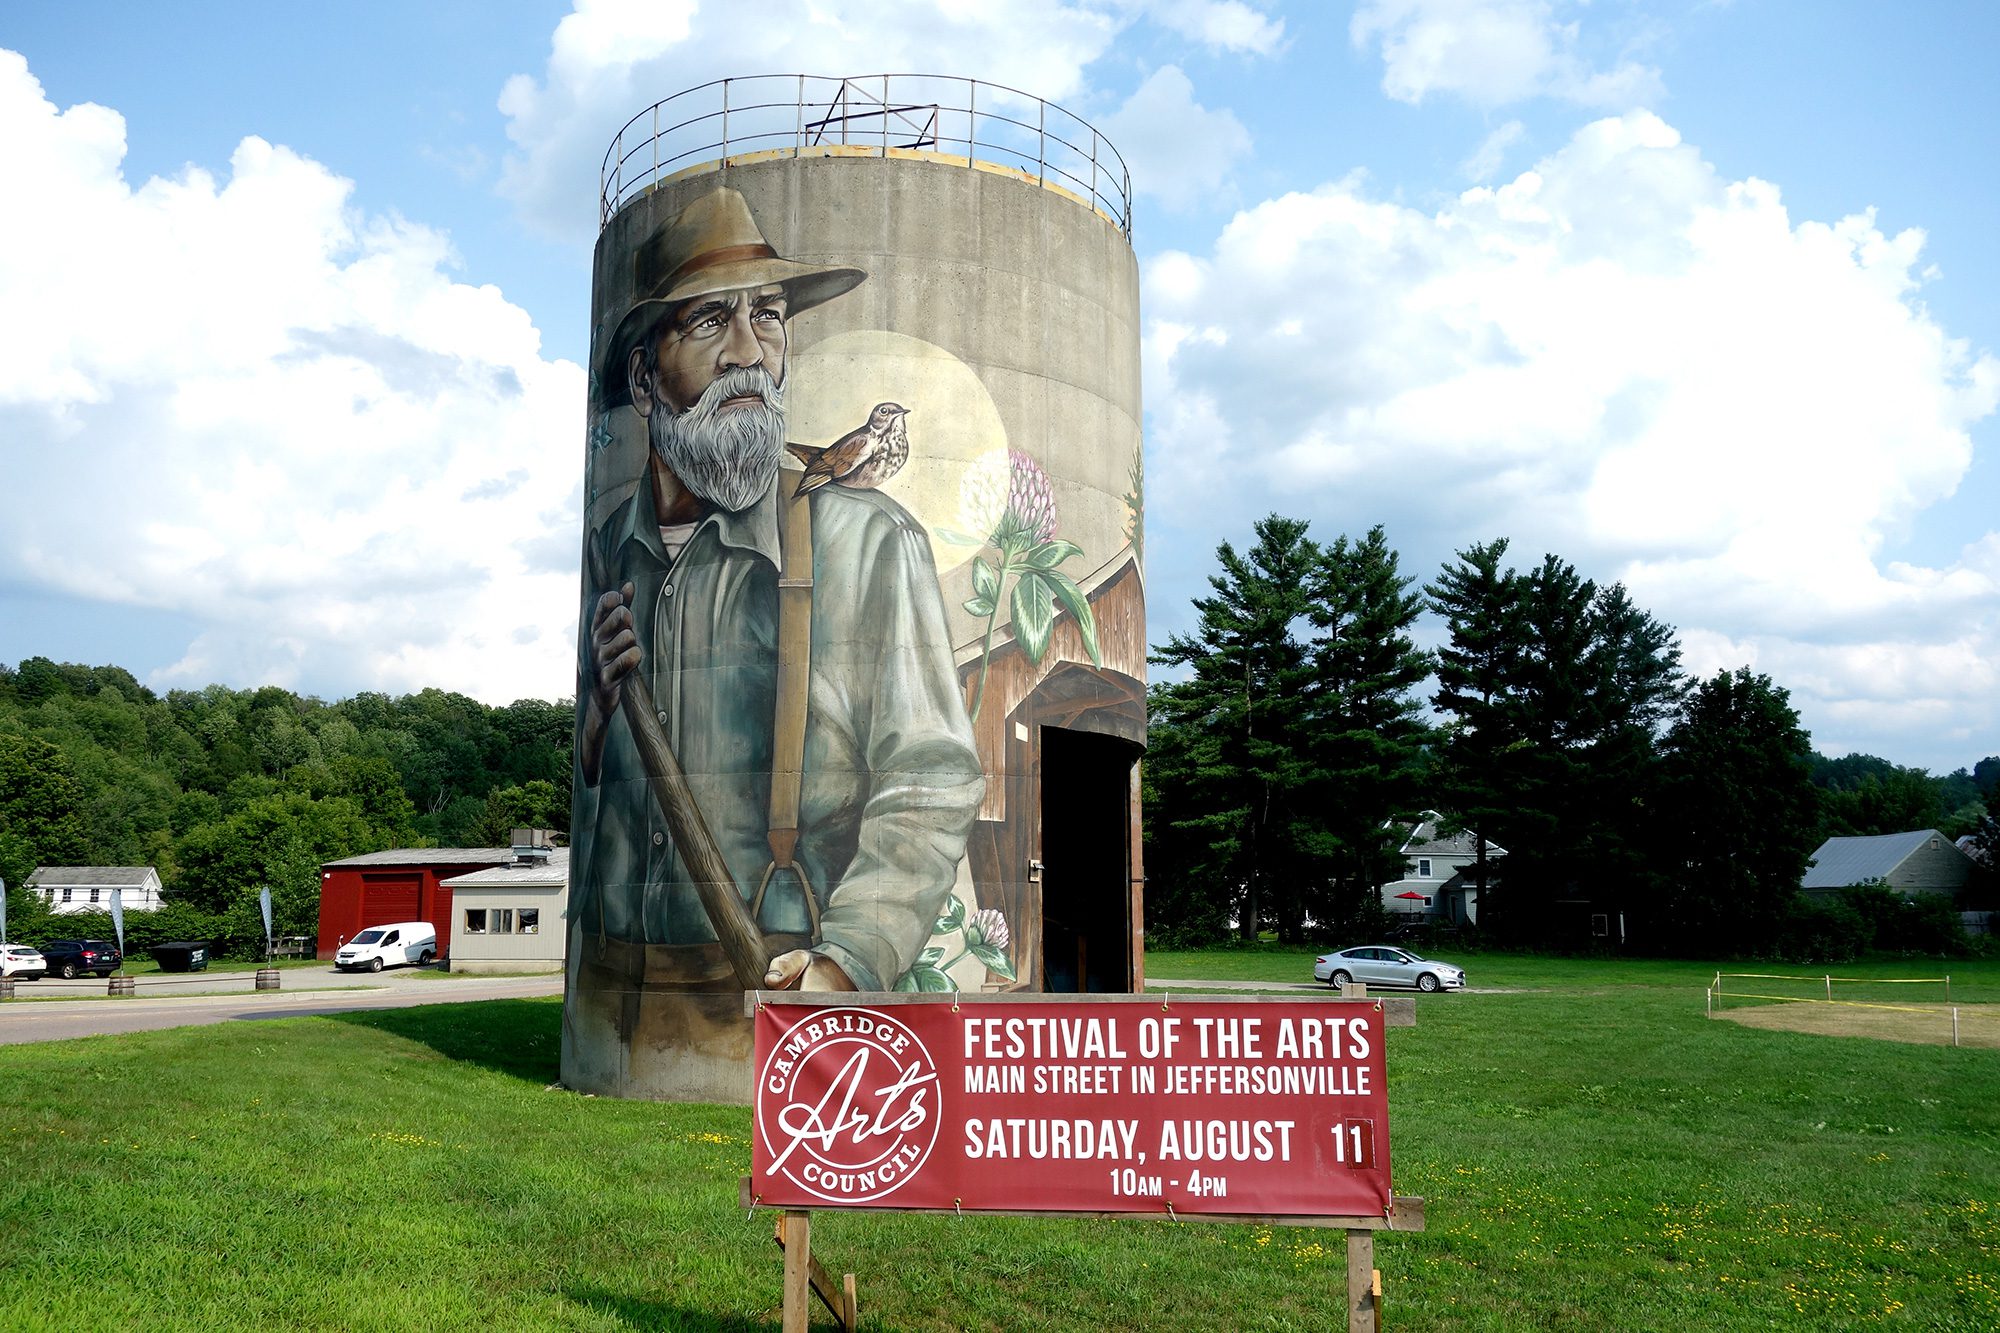 A mural depicting an old man wearing a wide brimmed hat is painted on the side of a silo in a field. 